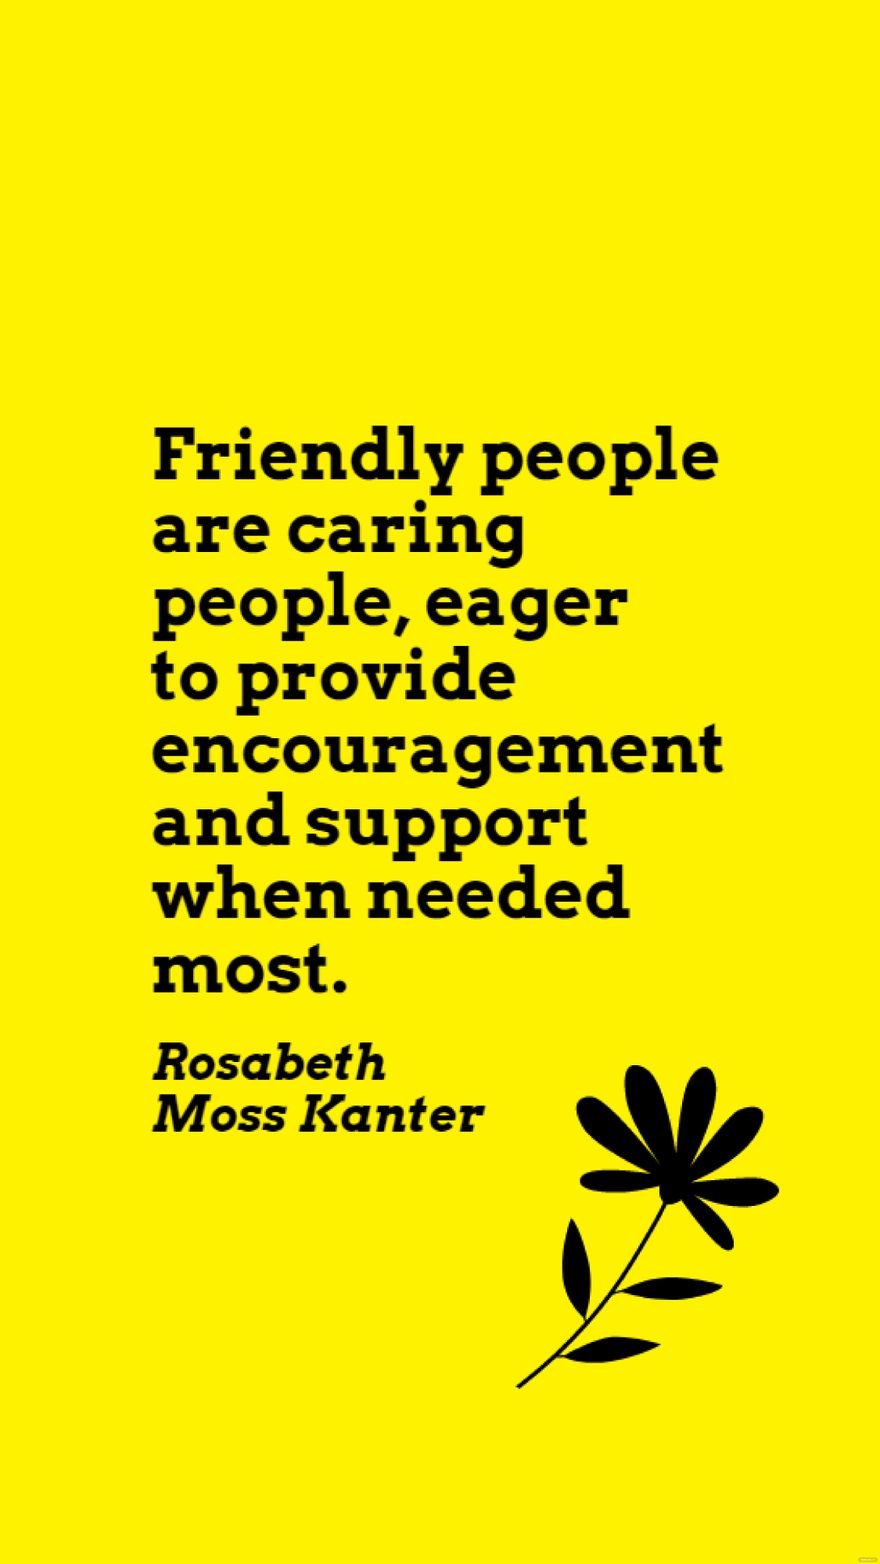 Rosabeth Moss Kanter - Friendly people are caring people, eager to provide encouragement and support when needed most.